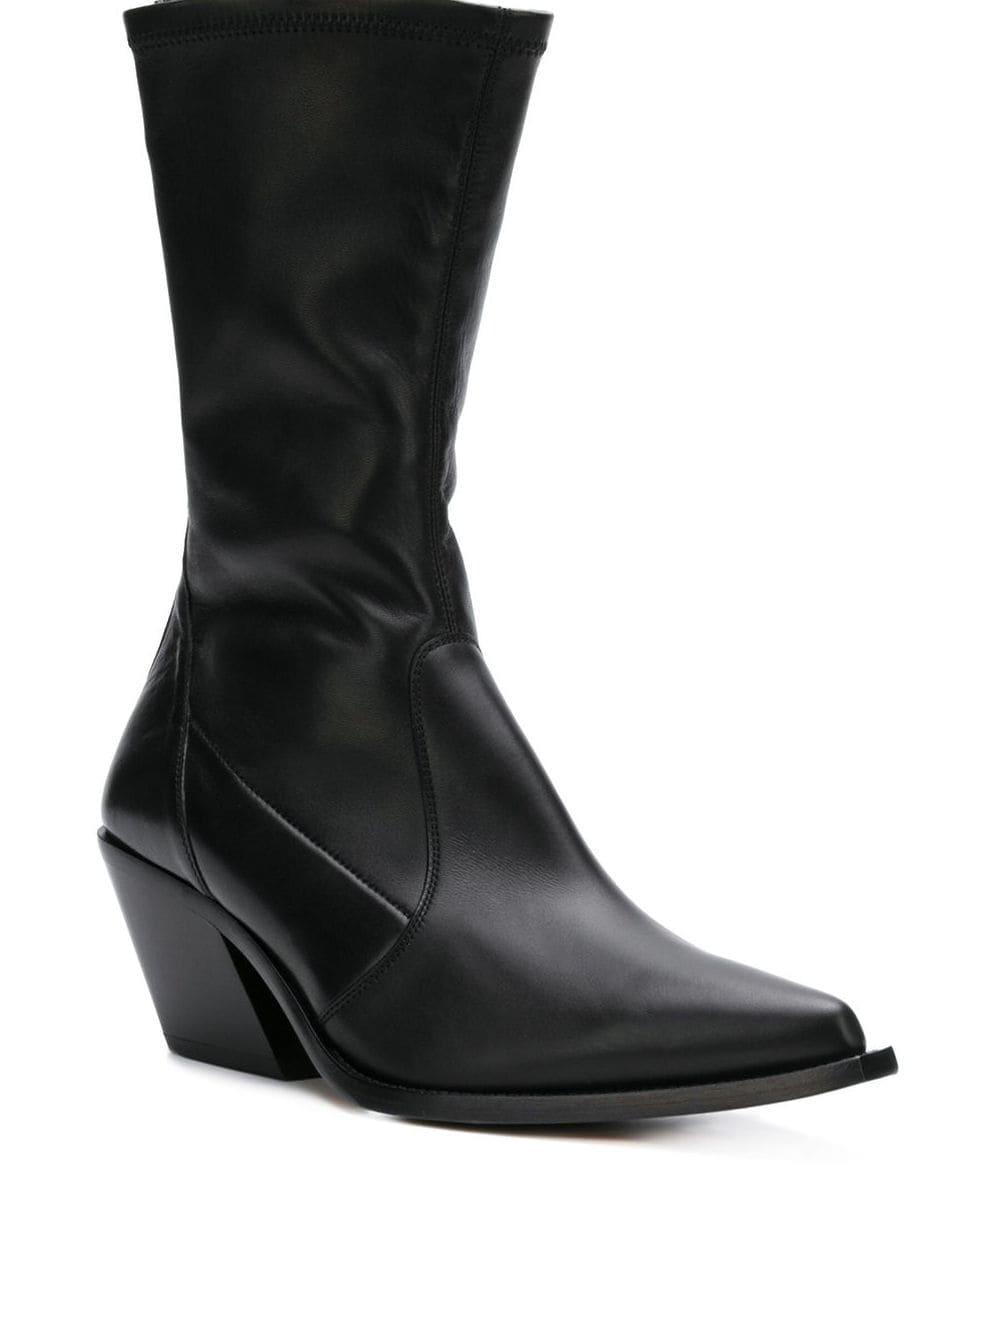 Givenchy Leather Rear-zip Pointed Boots in Black | Lyst